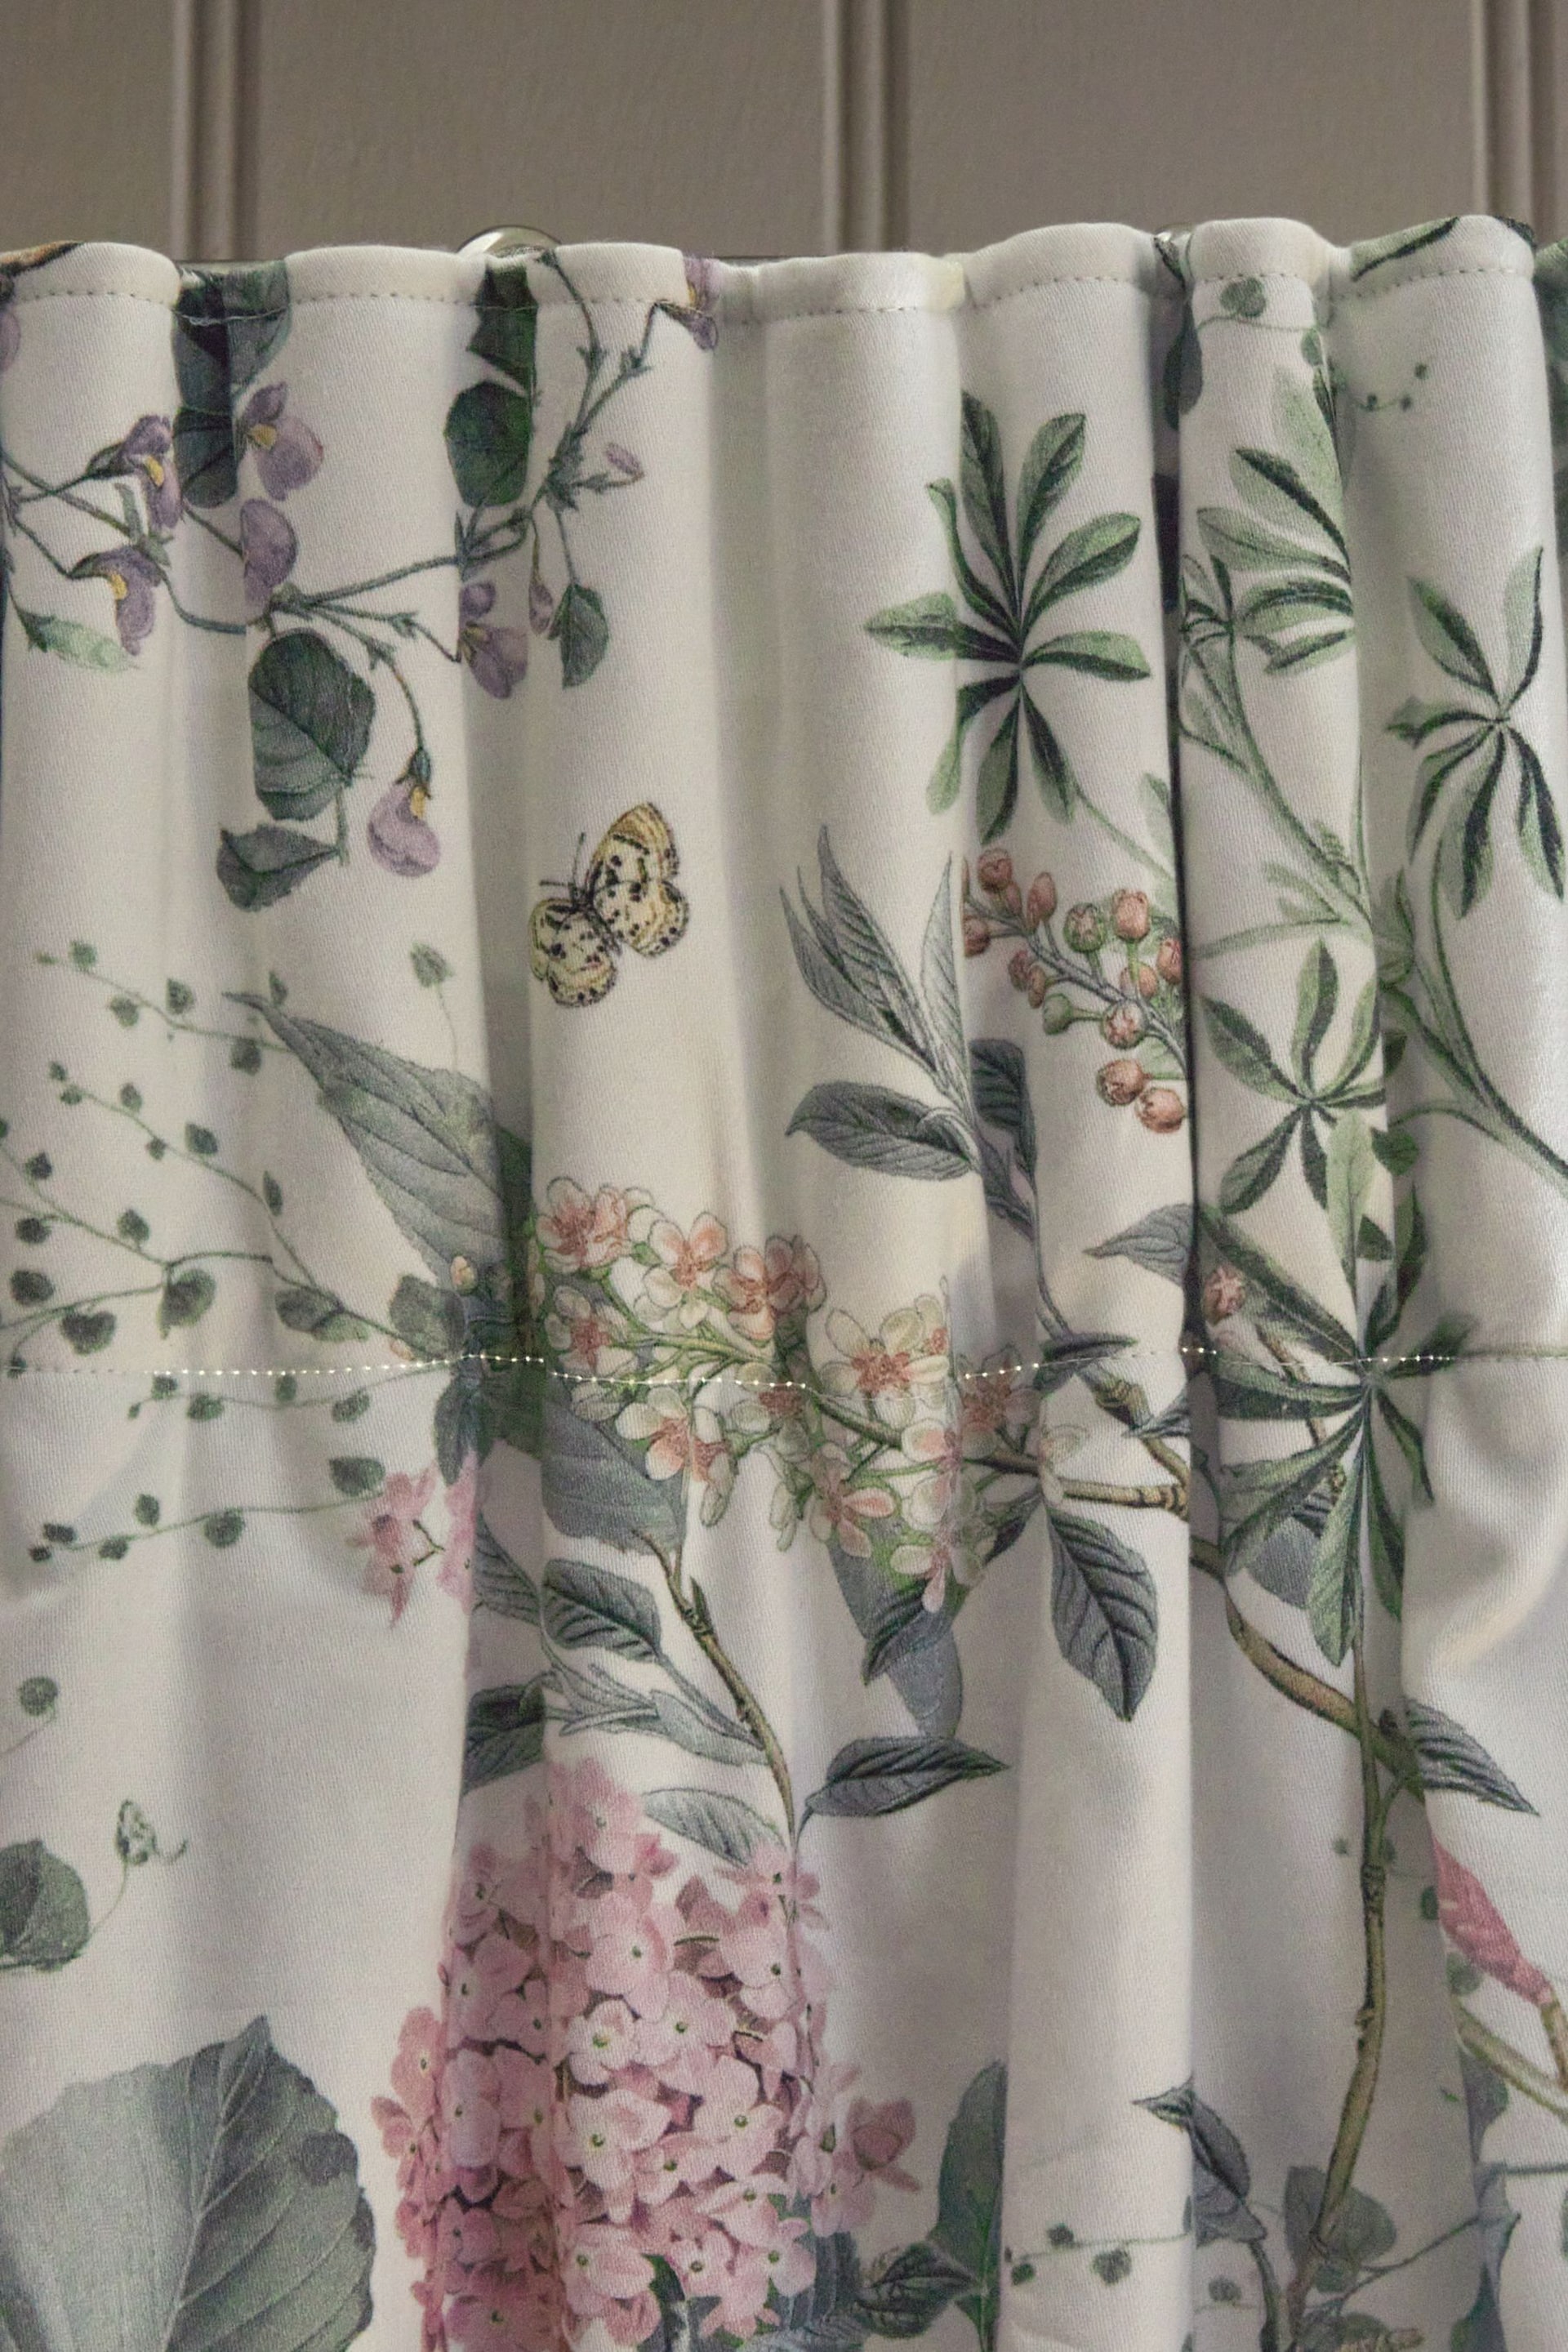 Natural Next Reflections Floral Pencil Pleat Blackout/Thermal Curtains - Image 6 of 8